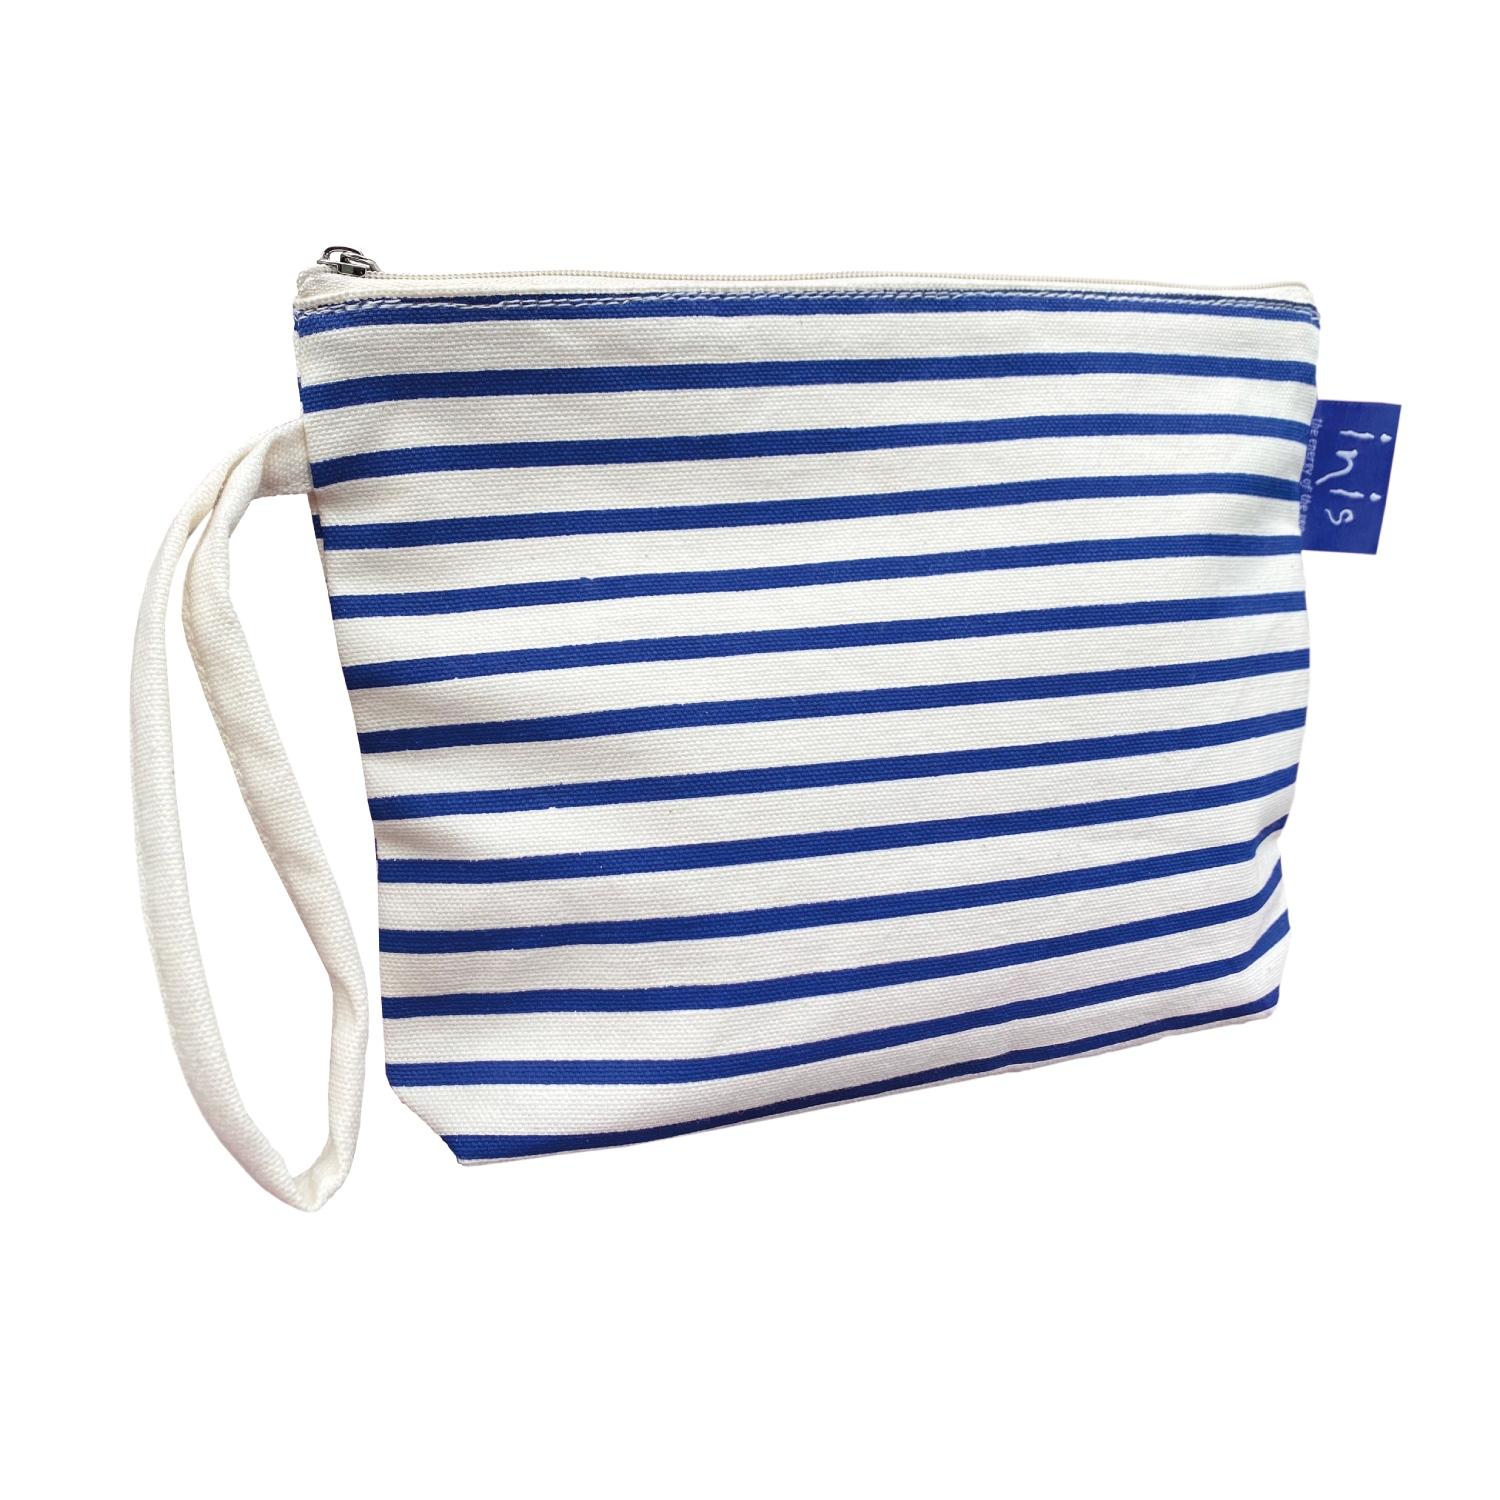 Inis cosmetic bag by fragrances of Ireland